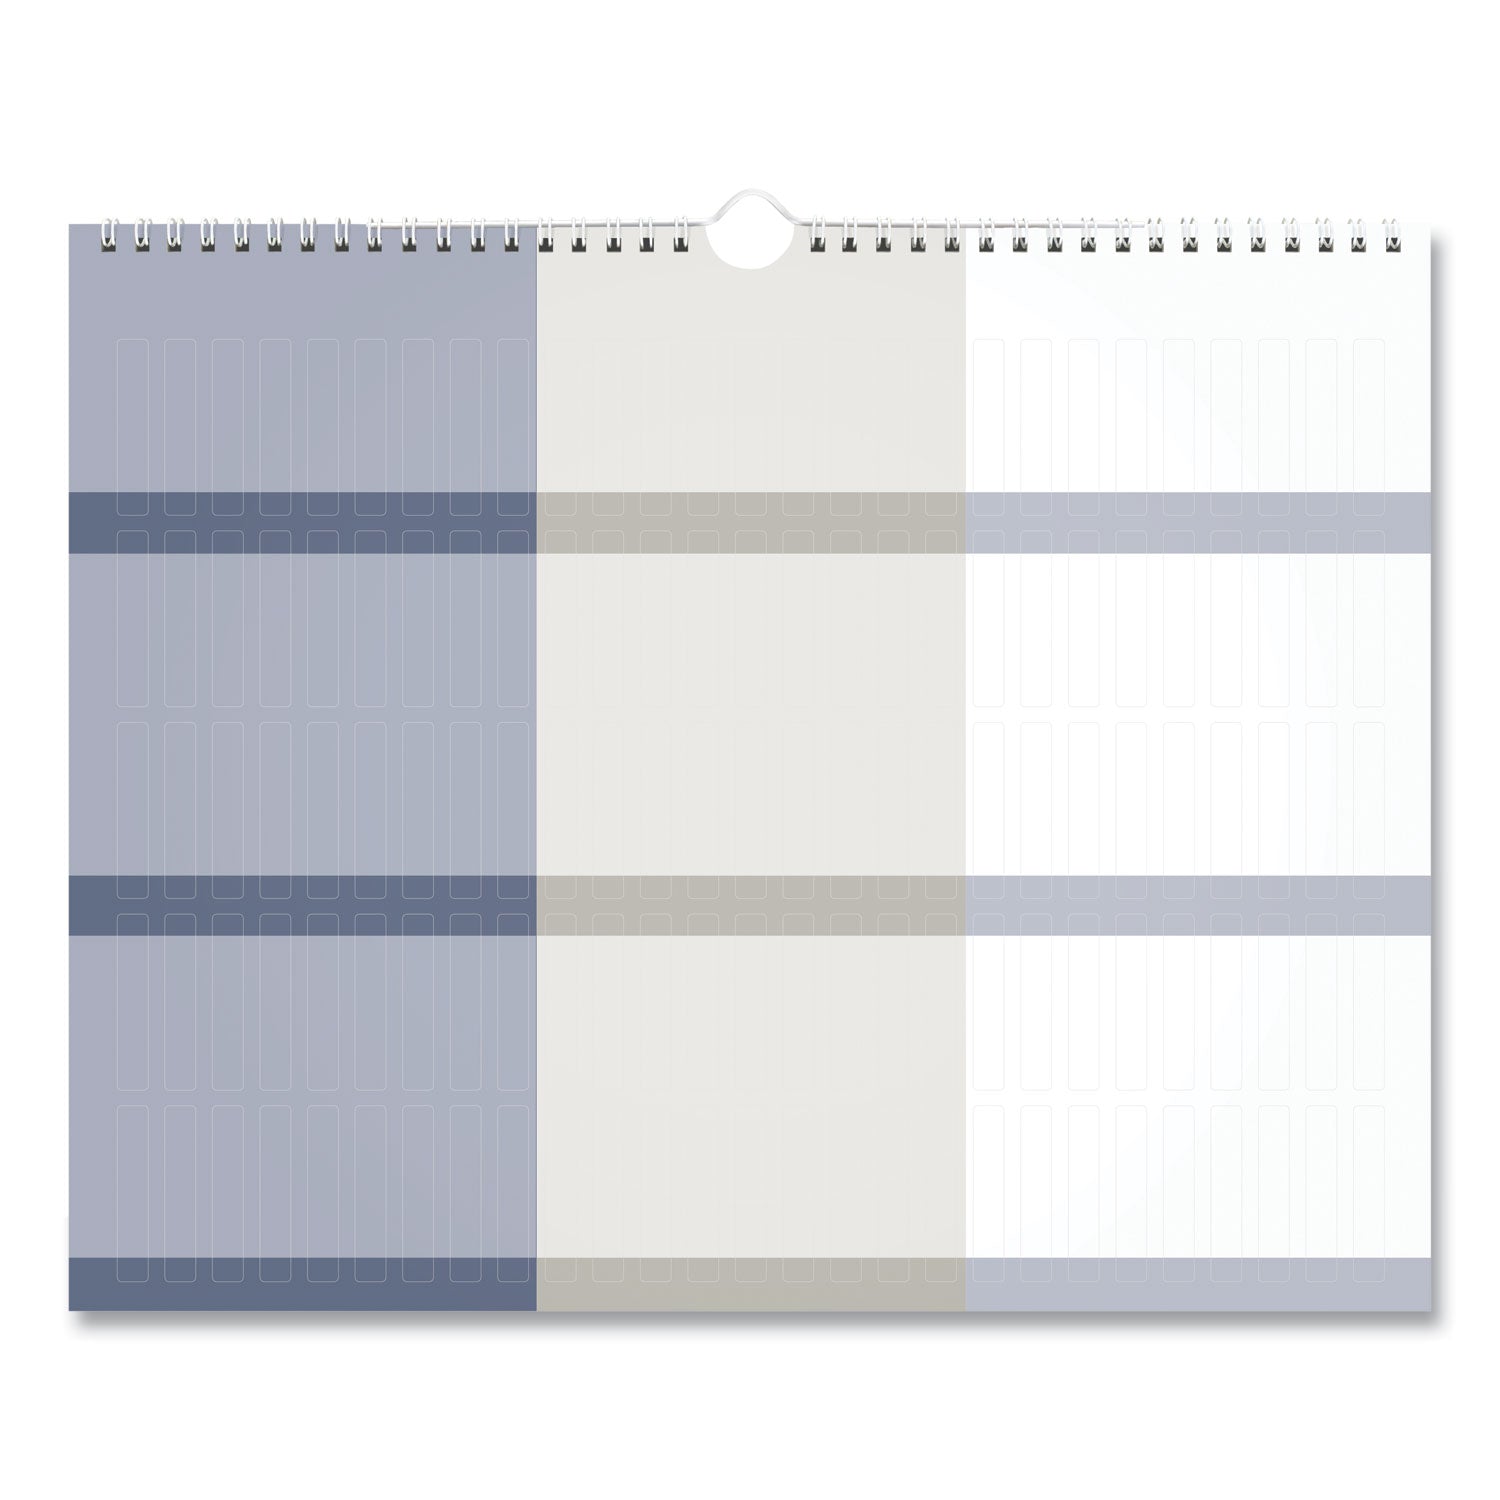 multi-schedule-wall-calendar-15-x-12-white-gray-sheets-12-month-jan-to-dec-2024_aagpm22ms28 - 2